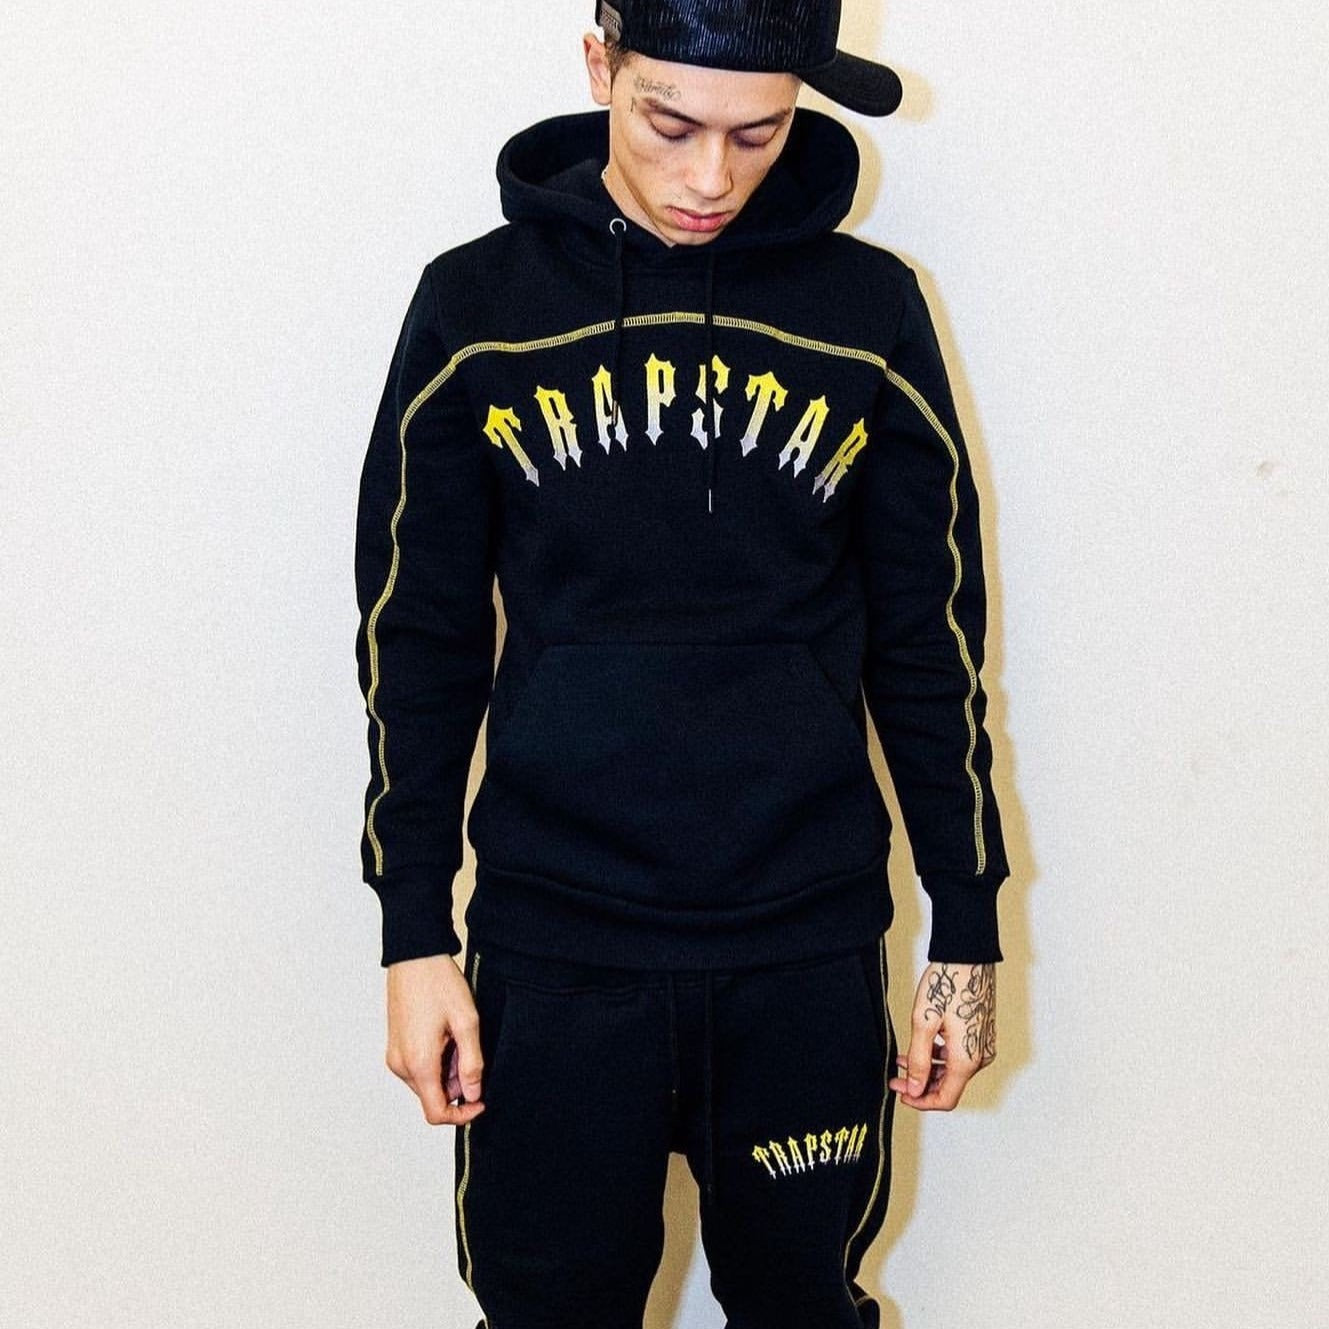 TRAPSTAR IRONGATE ARCH TRACKSUIT CENTRAL CEE BLACK YELLOW KICKKONNECT